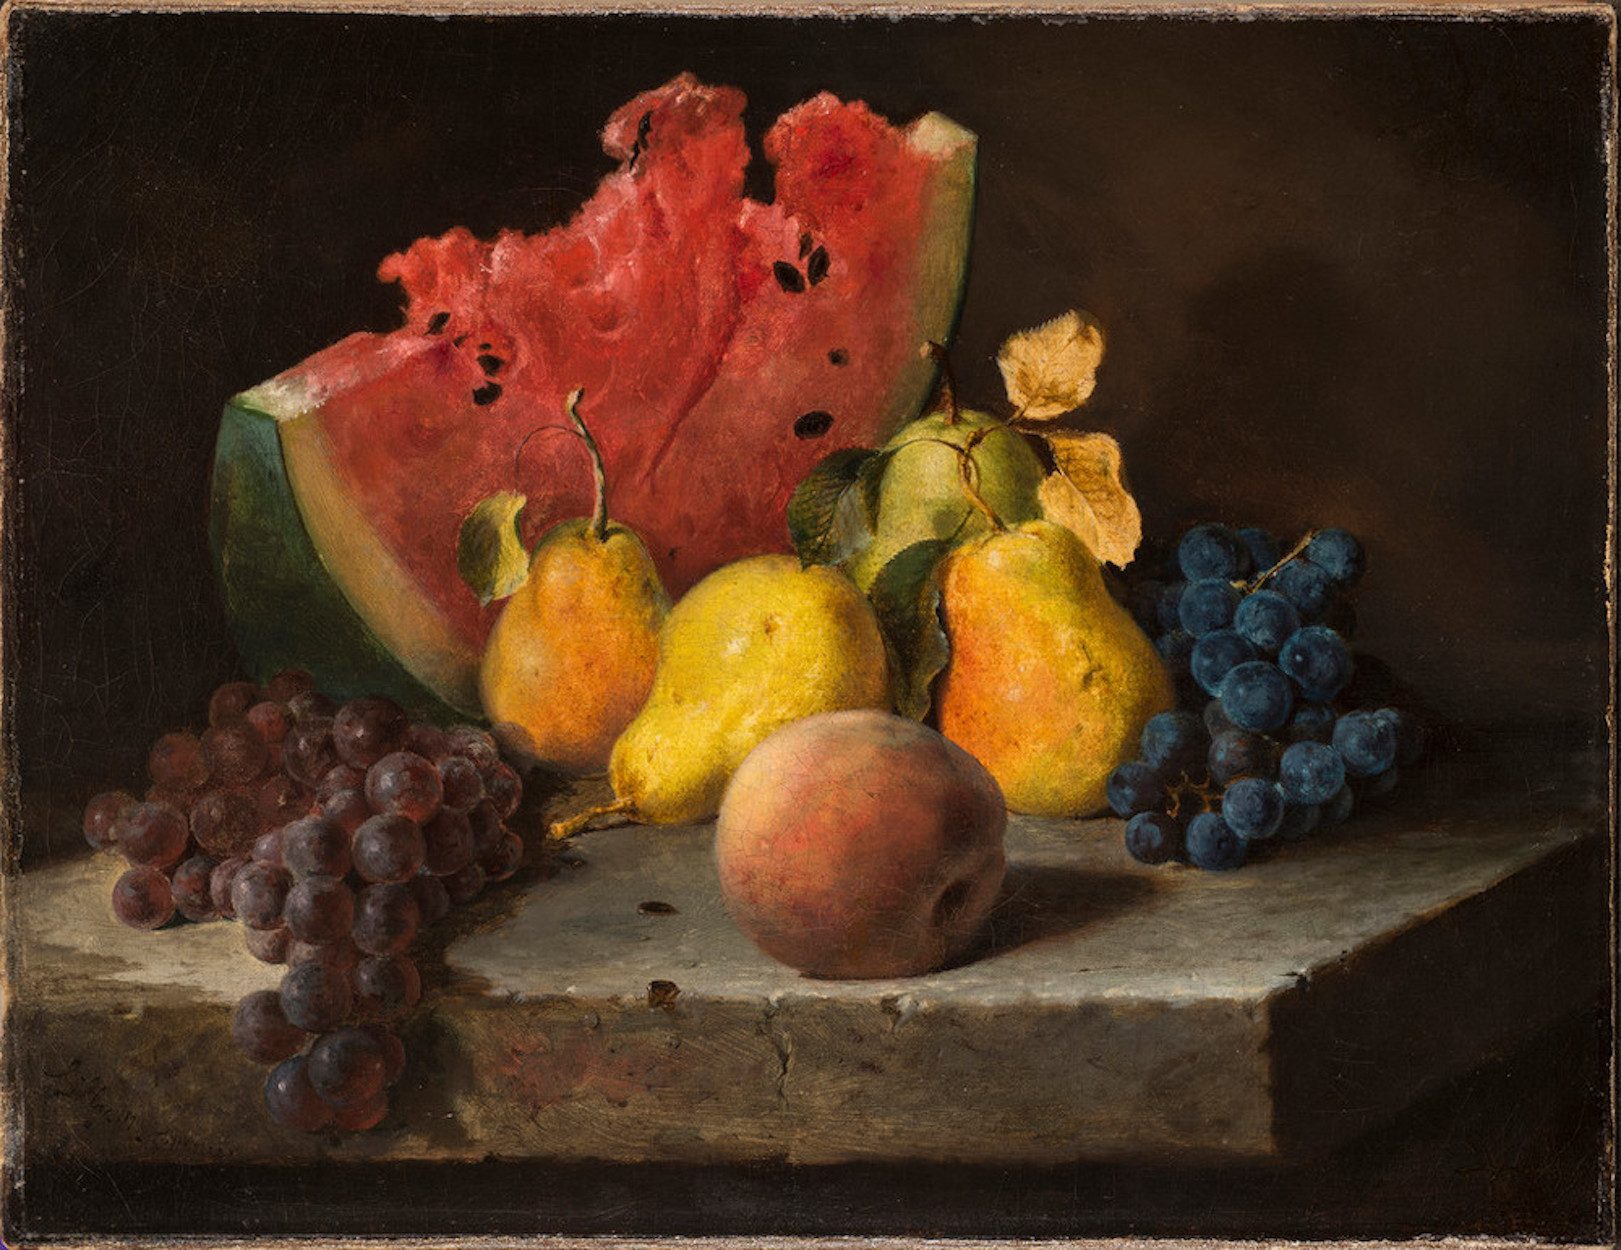 Still Life with Watermelon, Pears, Grapes by Lilly Martin Spencer - 1860 - 33 x 43.5 cm National Museum of Women in the Arts